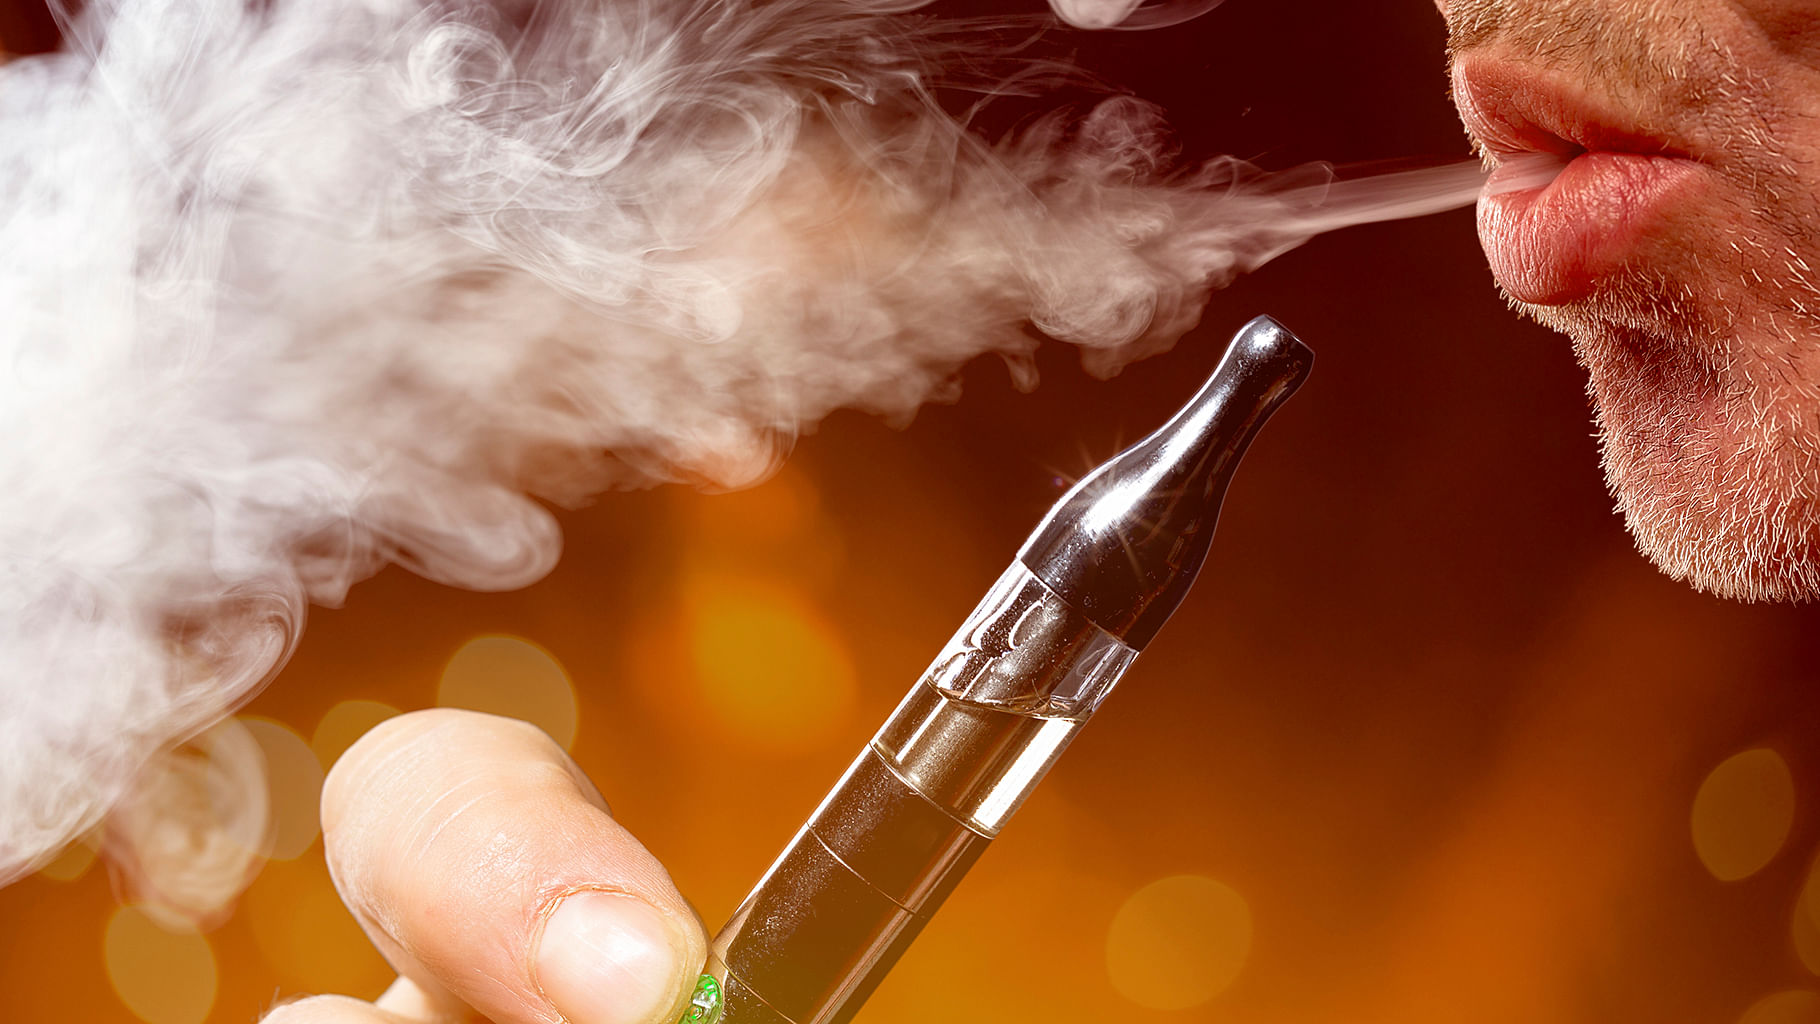 This can be a bad news for smokers. (Photo: iStockphoto)